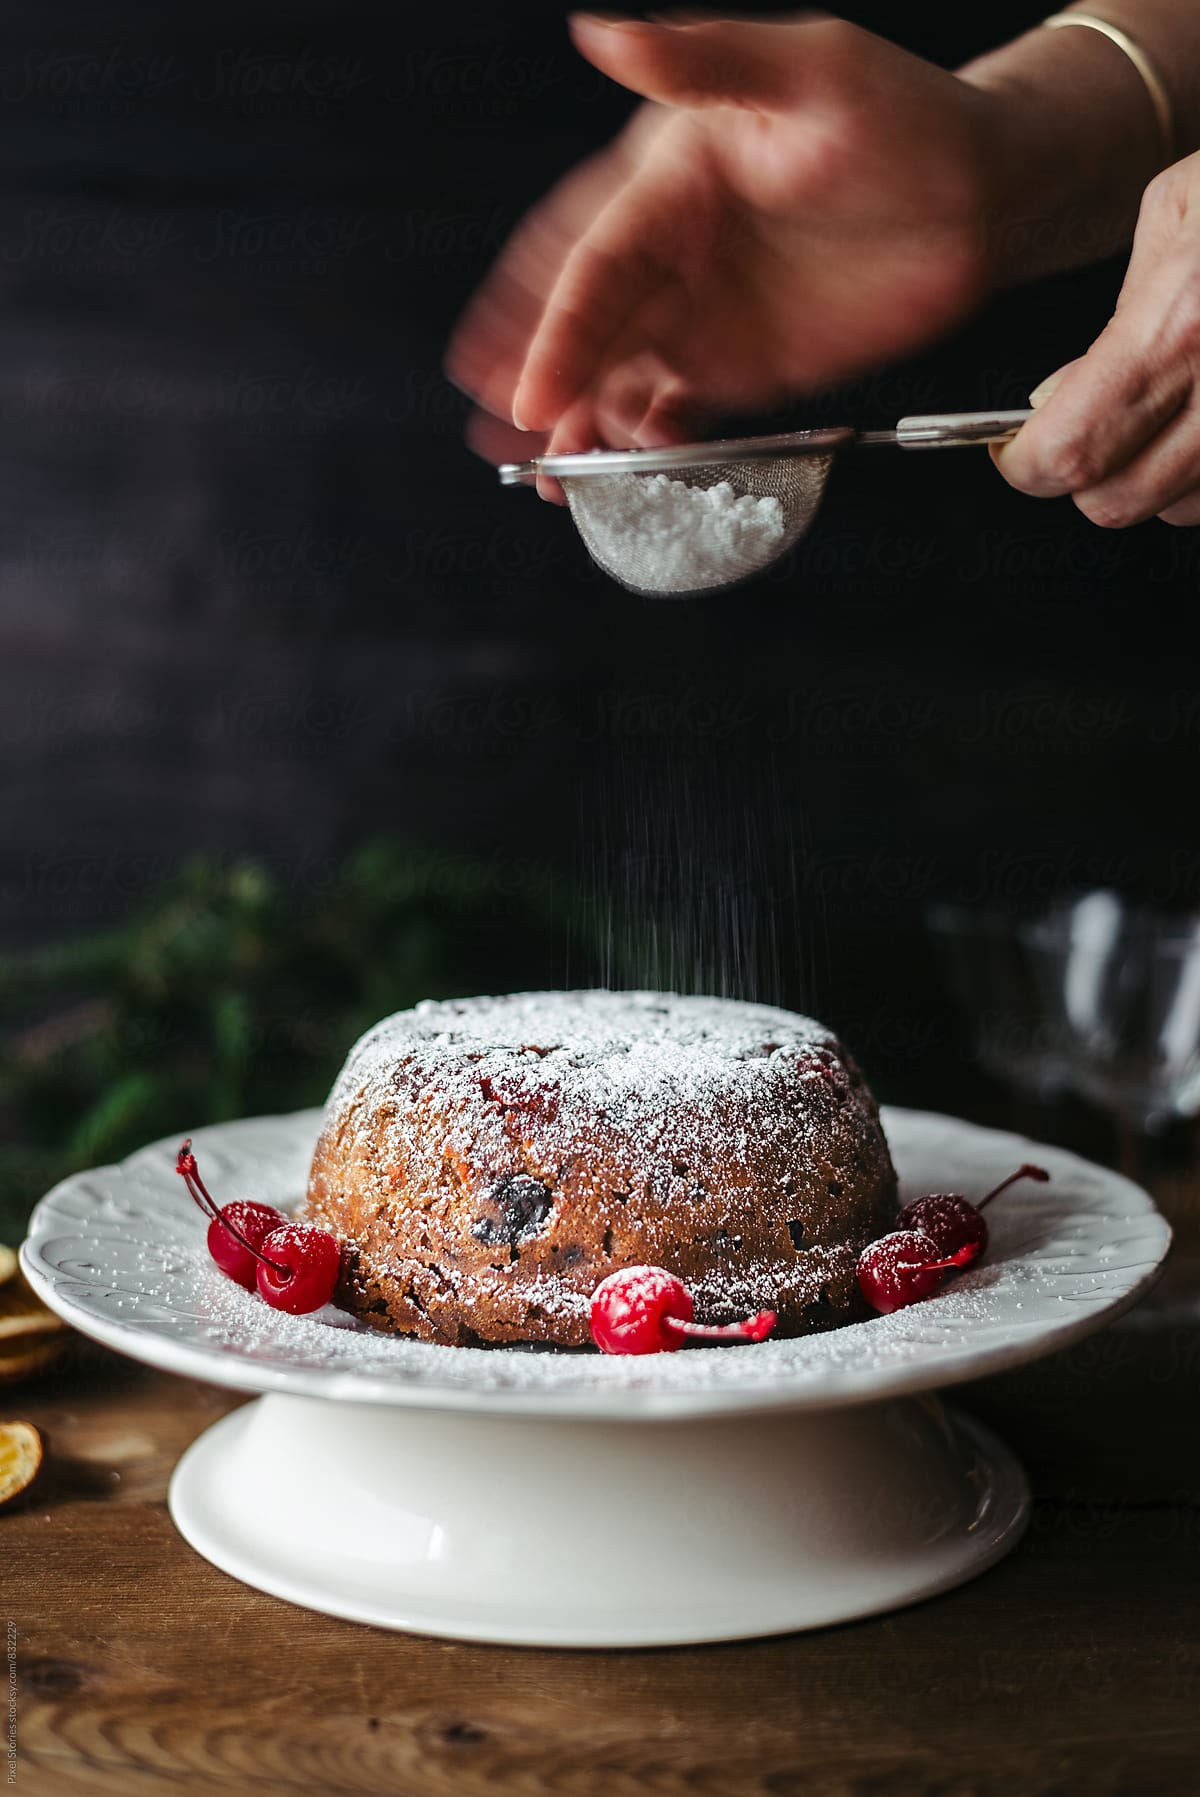 Dusting Christmas pudding with powdered sugar